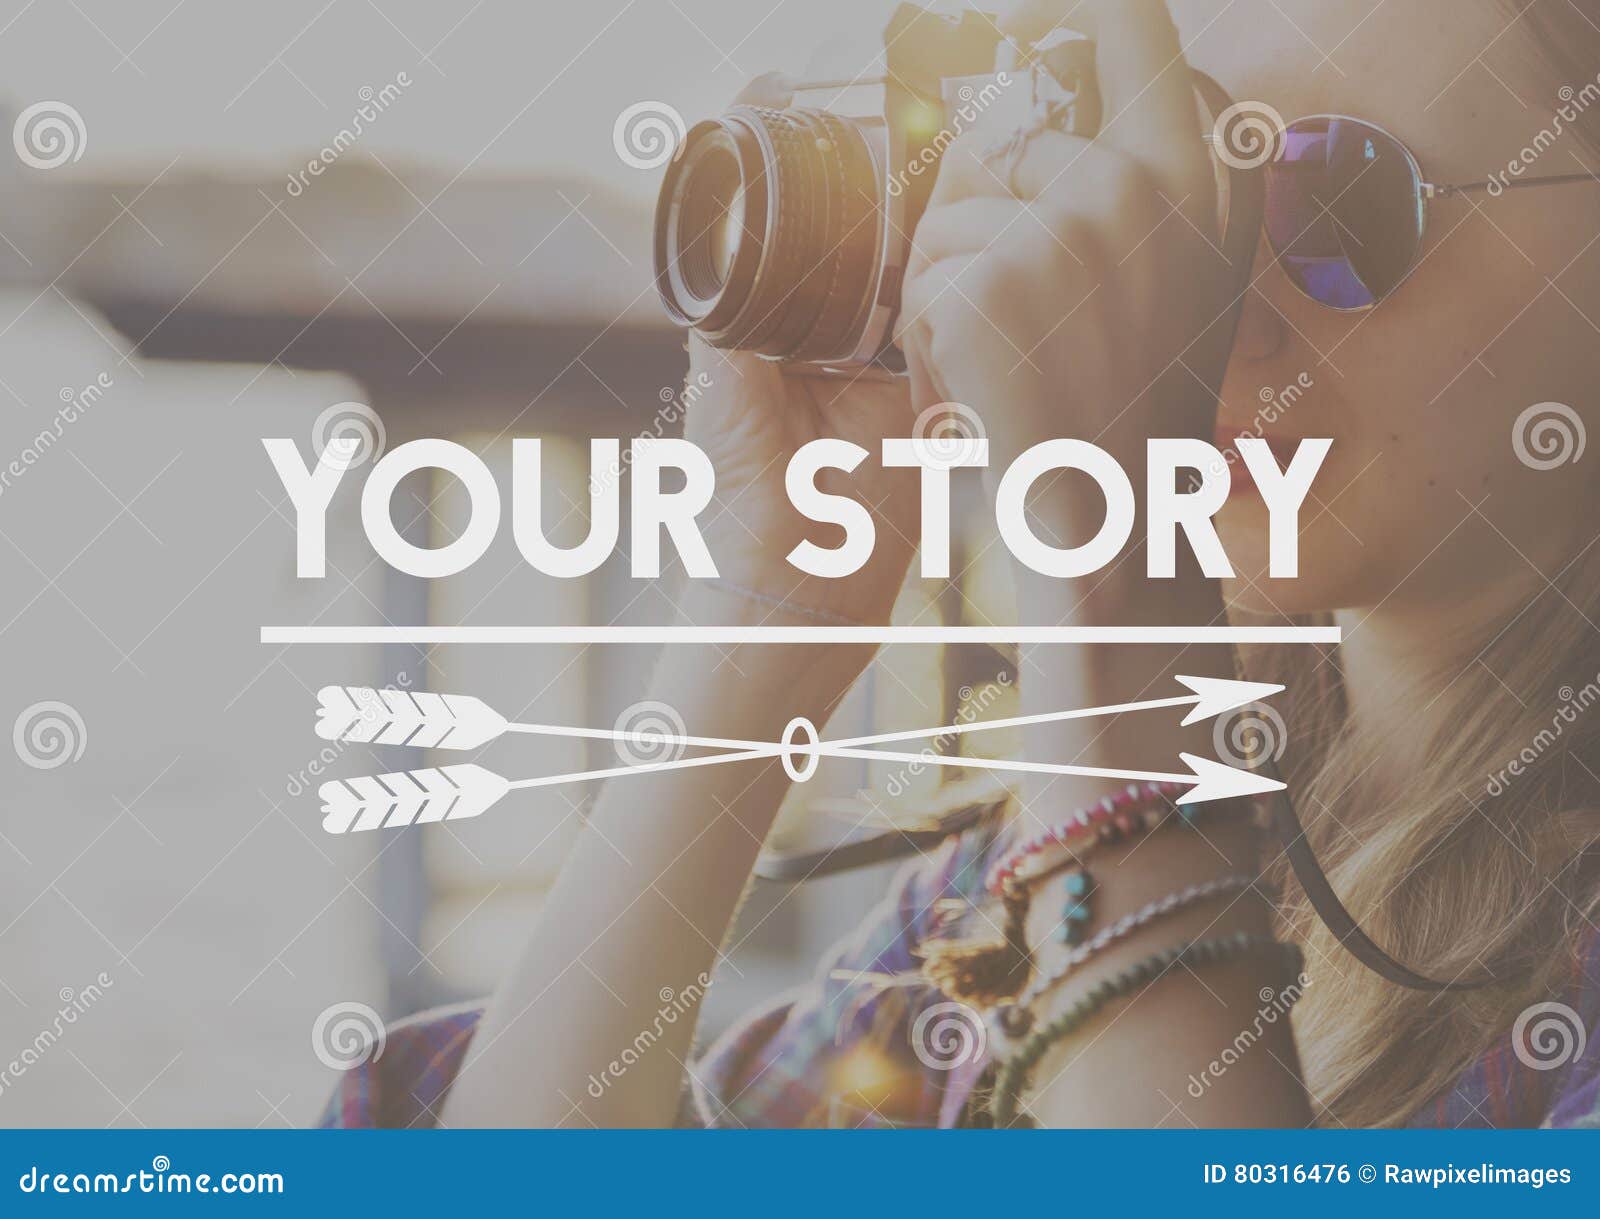 your story life moments memory concept